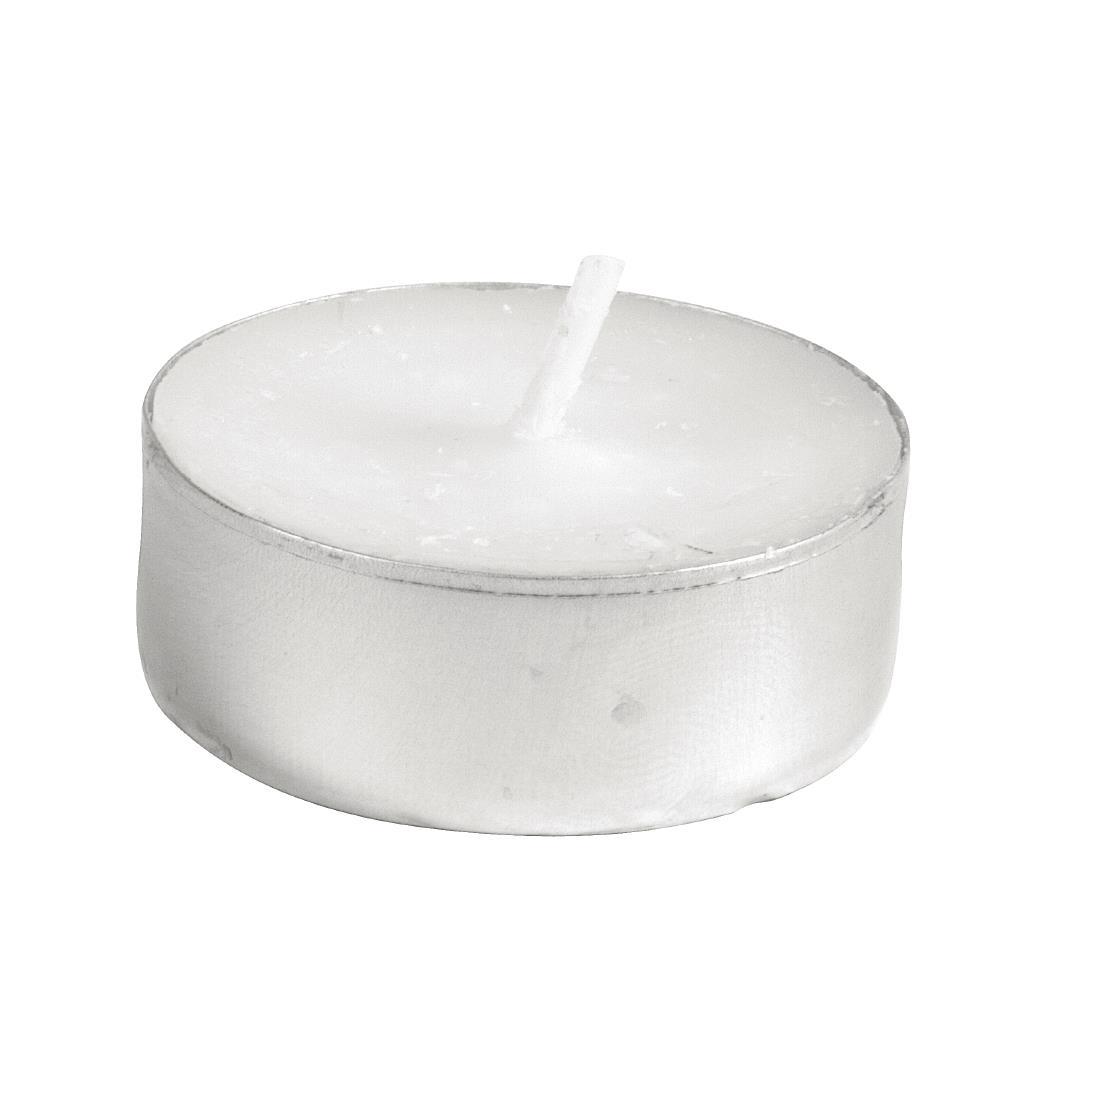 Olympia 4 Hour Tealights (Pack of 100) - GF448  - 7